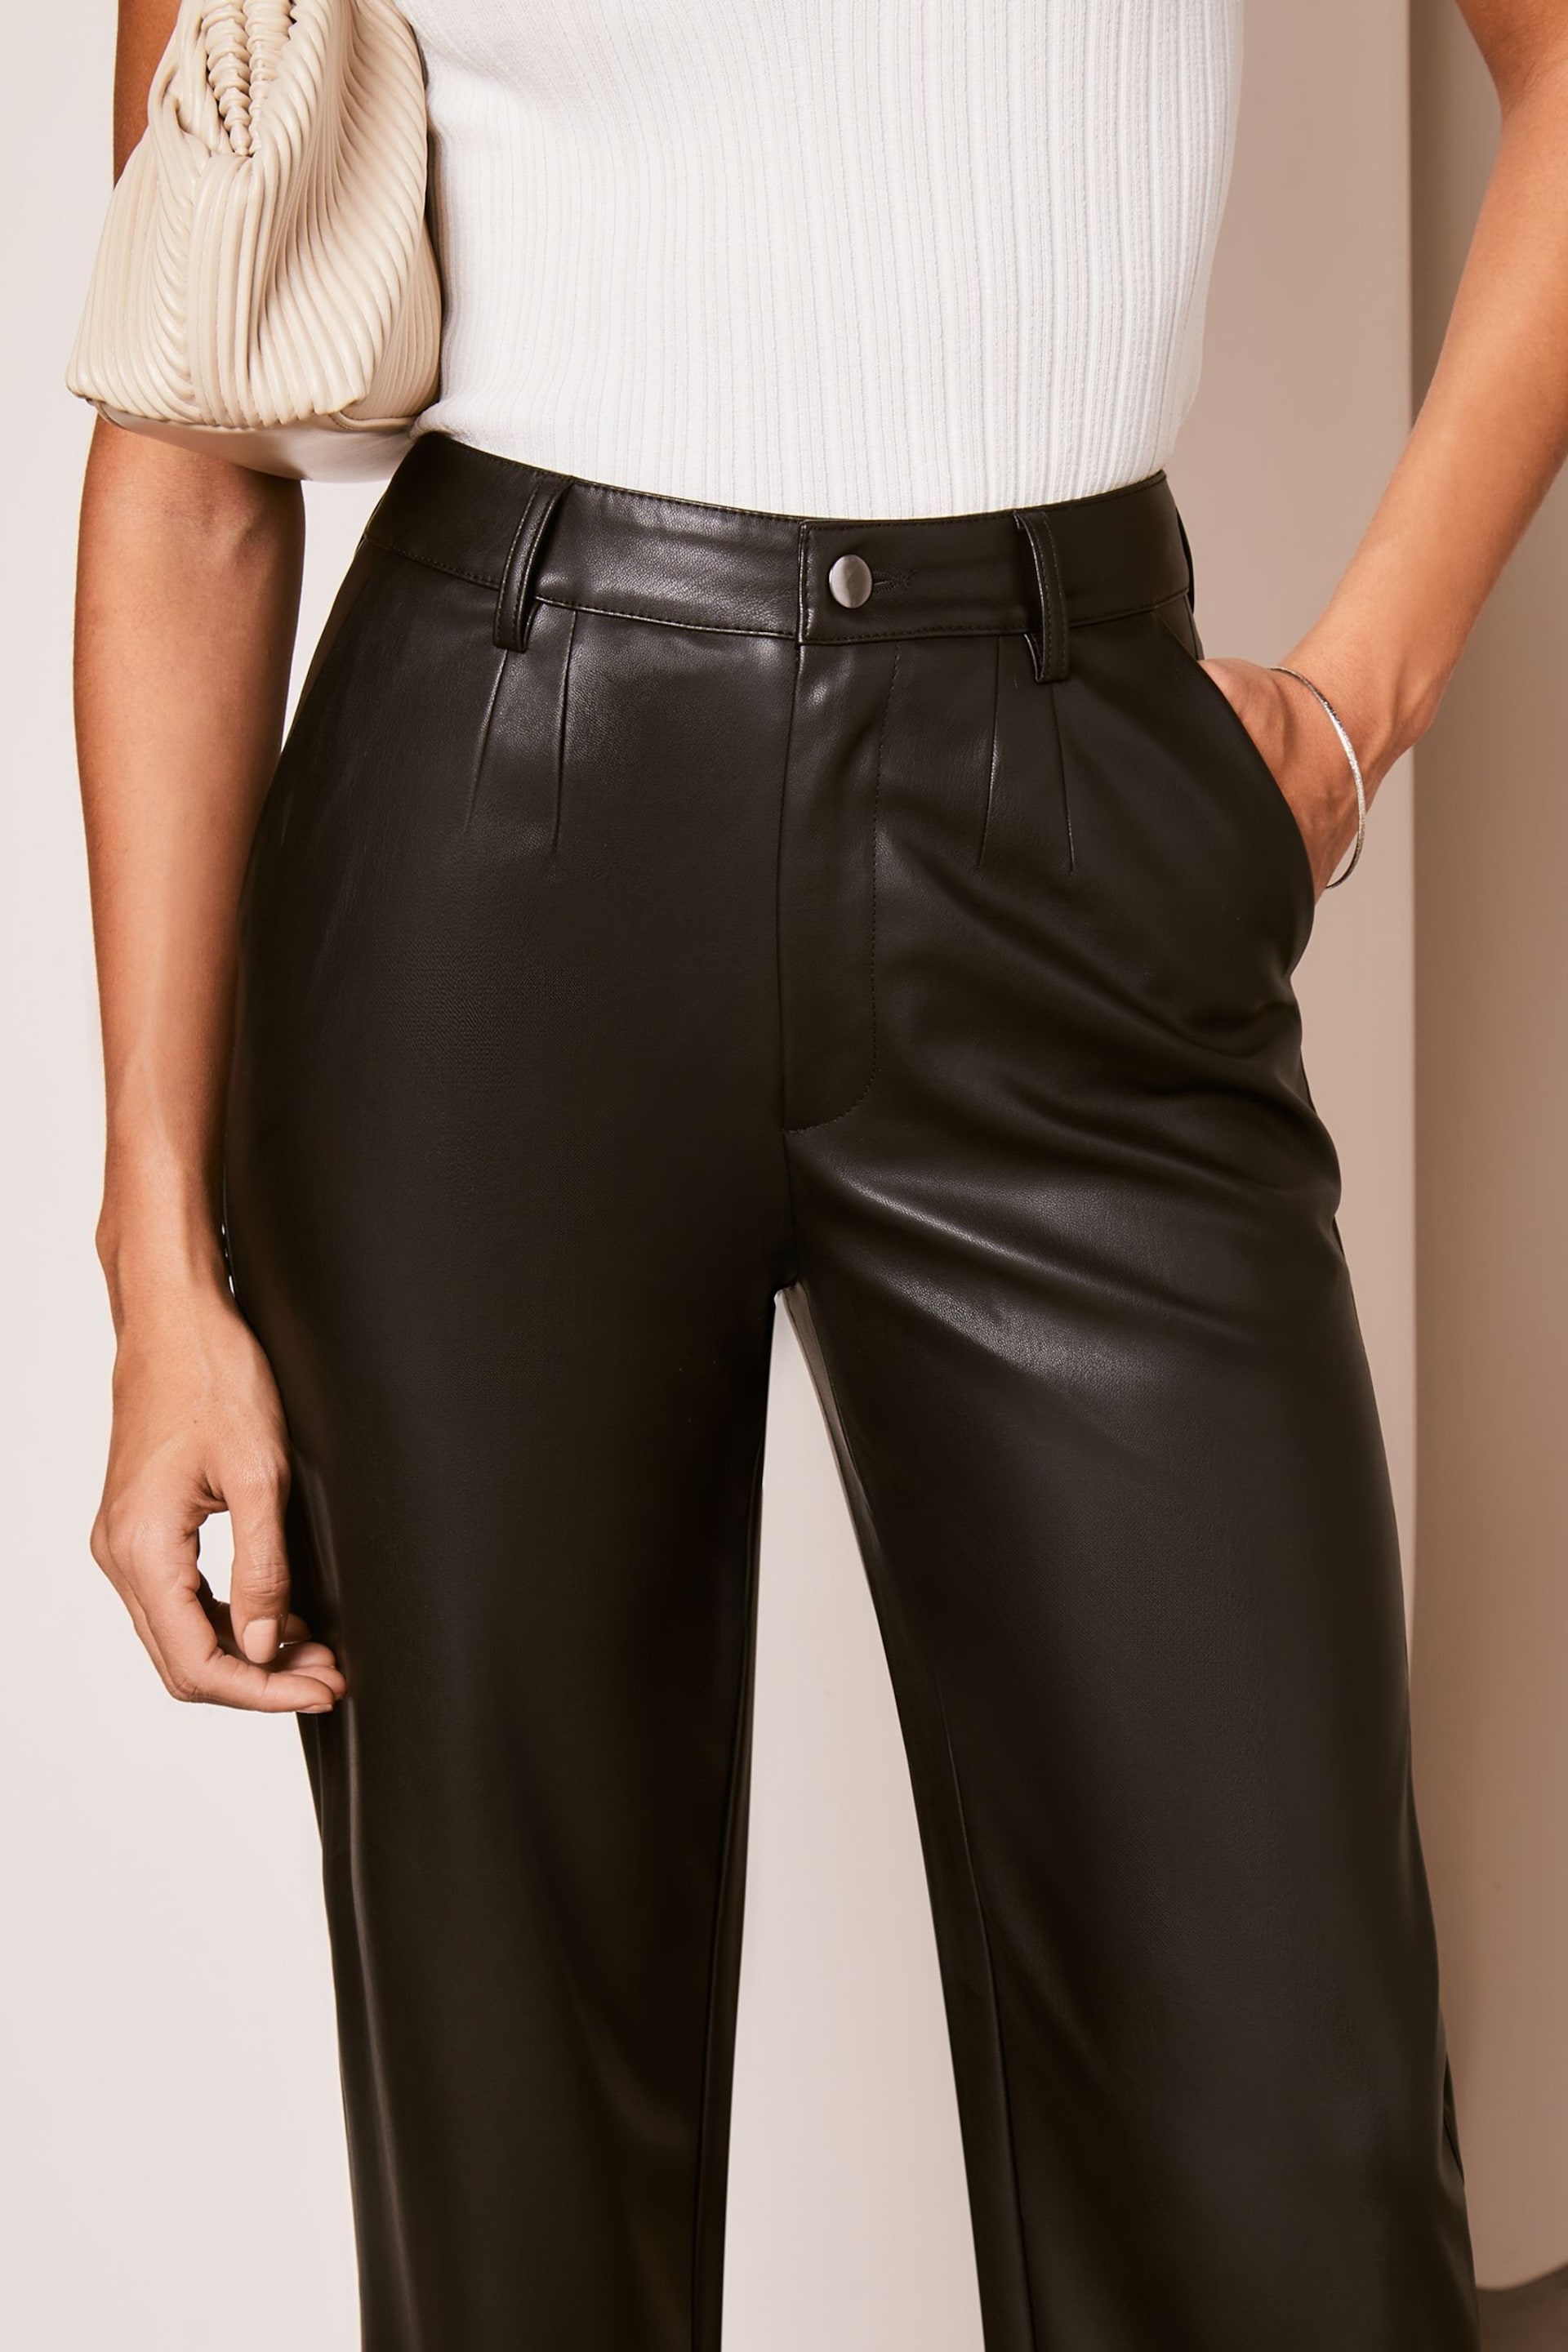 Lipsy Black Faux Leather Wide Leg Trousers - Image 4 of 4